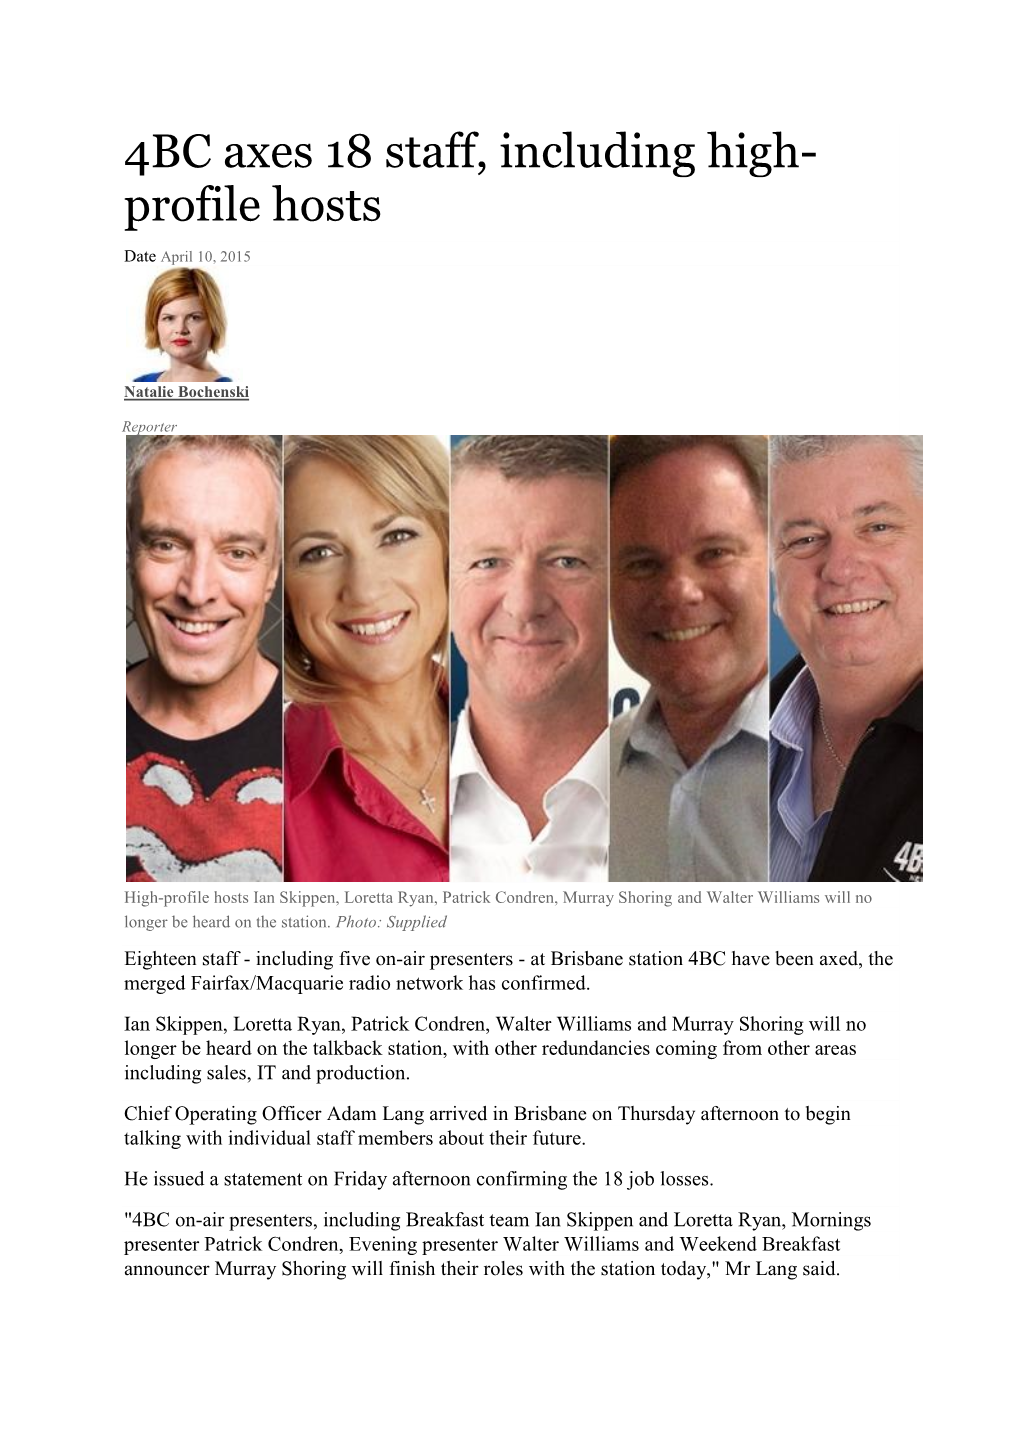 4BC Axes 18 Staff, Including High- Profile Hosts